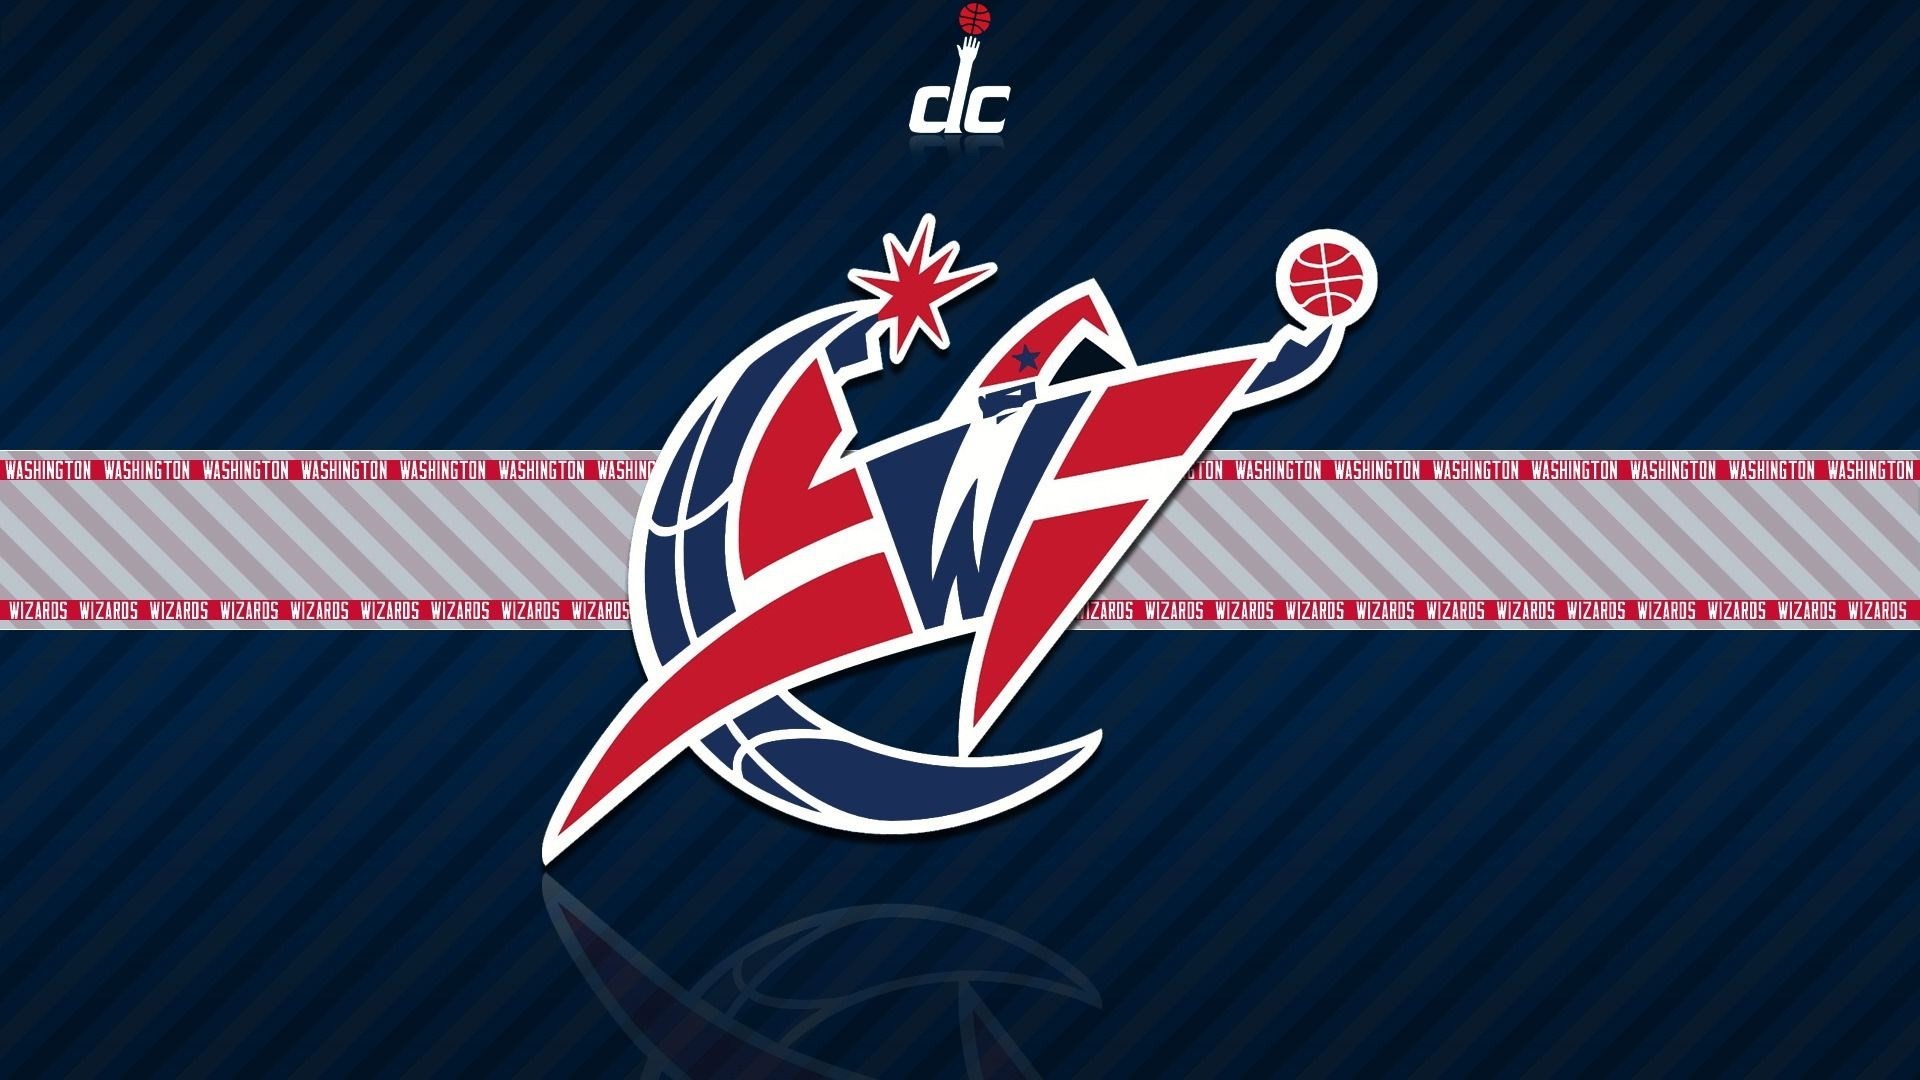 NBA Team Logo HD Wallpapers 2019  Free download and software reviews   CNET Download